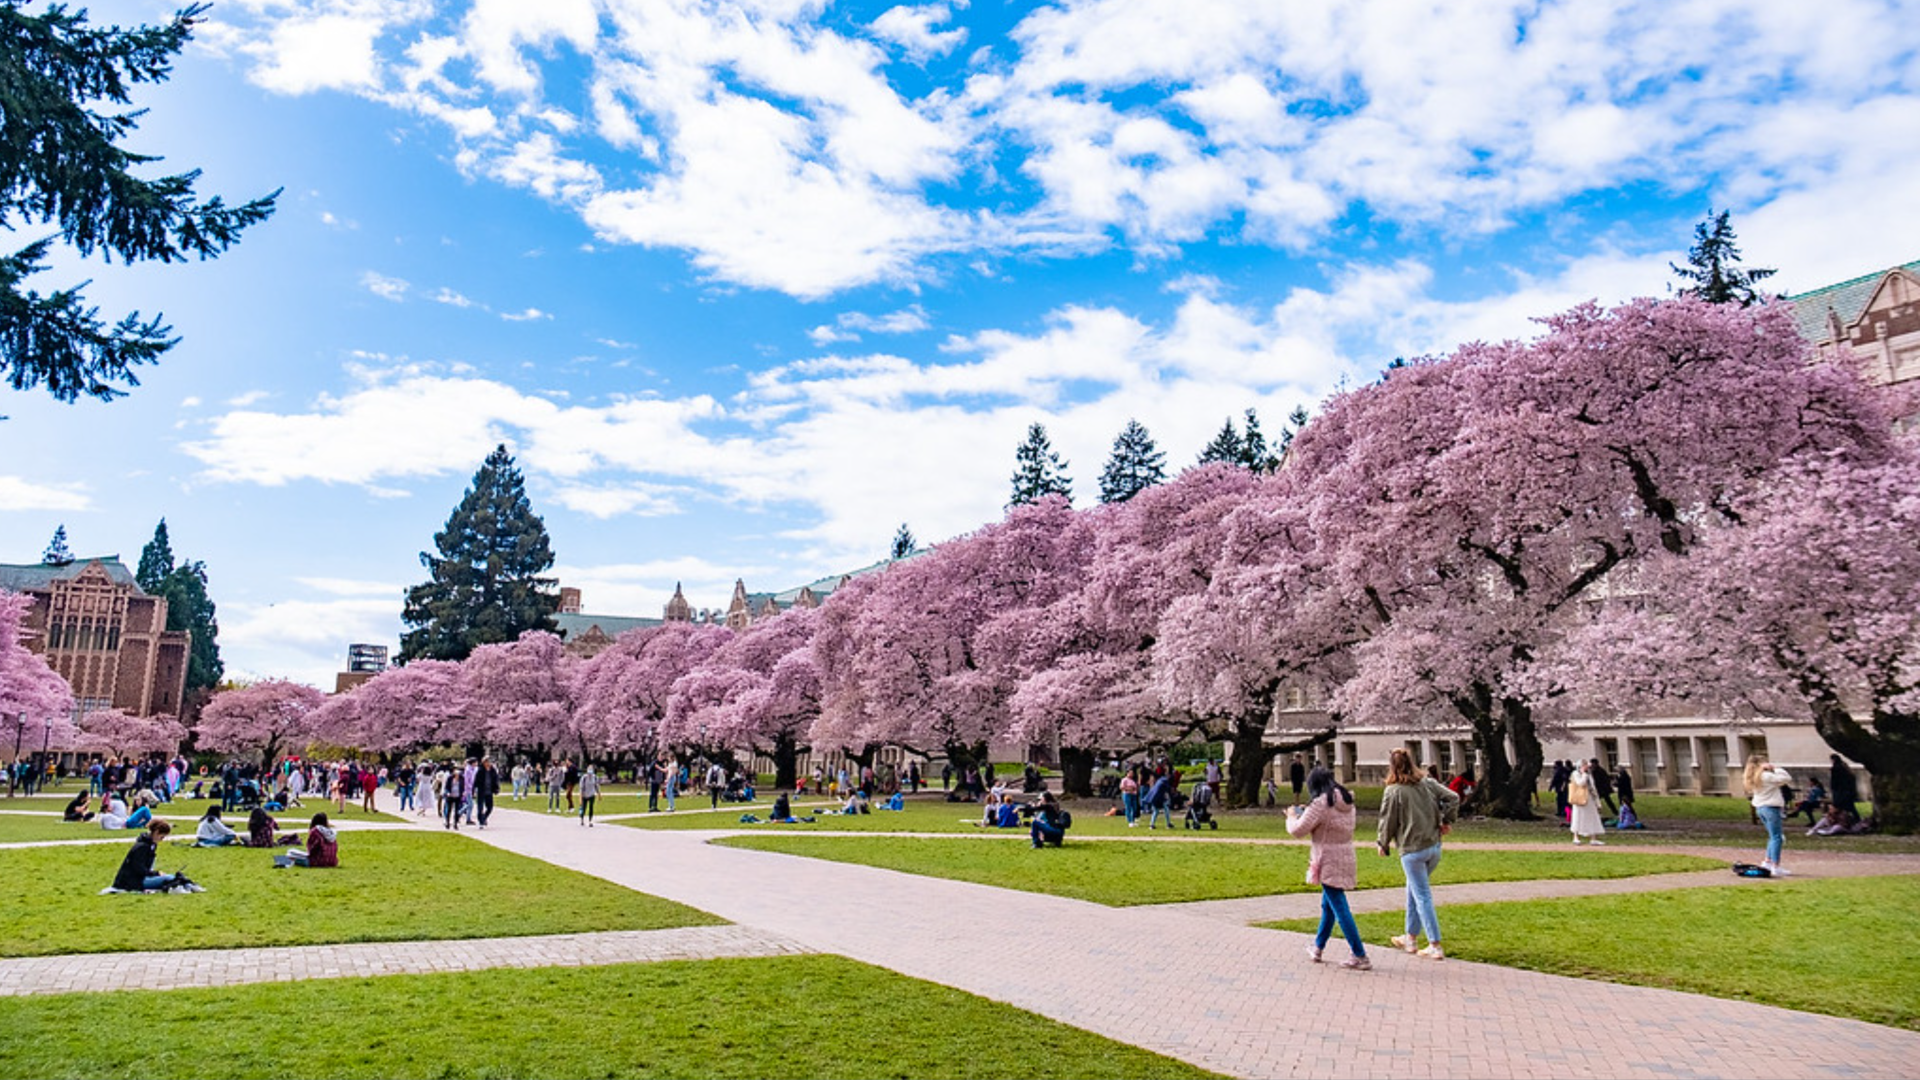 A view of the quad at the University of Washington while the cherry blossoms are in bloom.